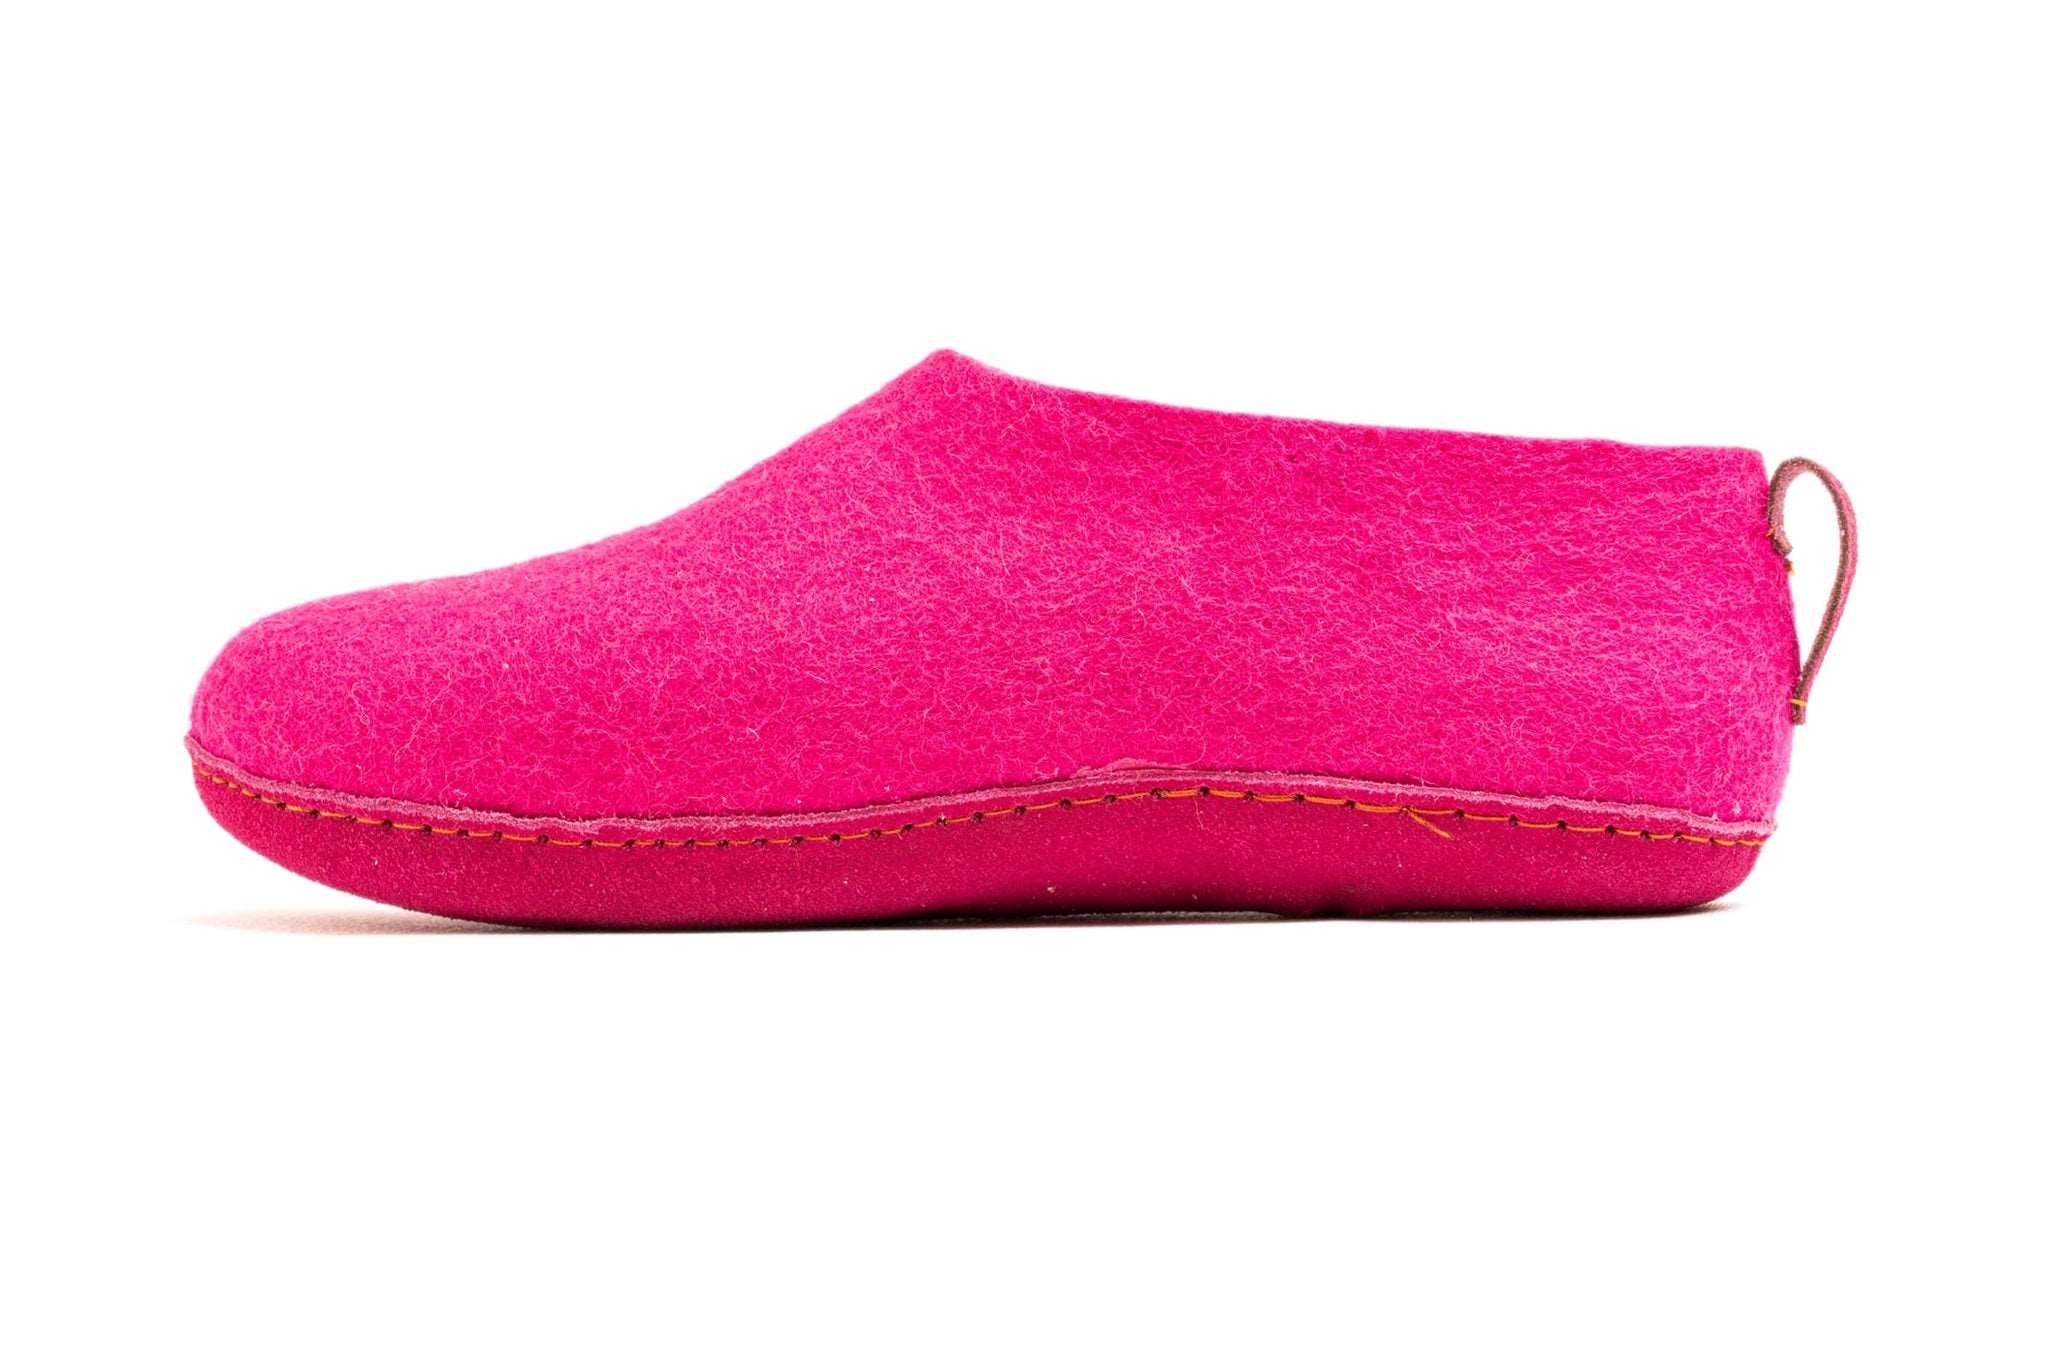 Indoor Shoes With Leather Sole - Fuchsia - Woollyes